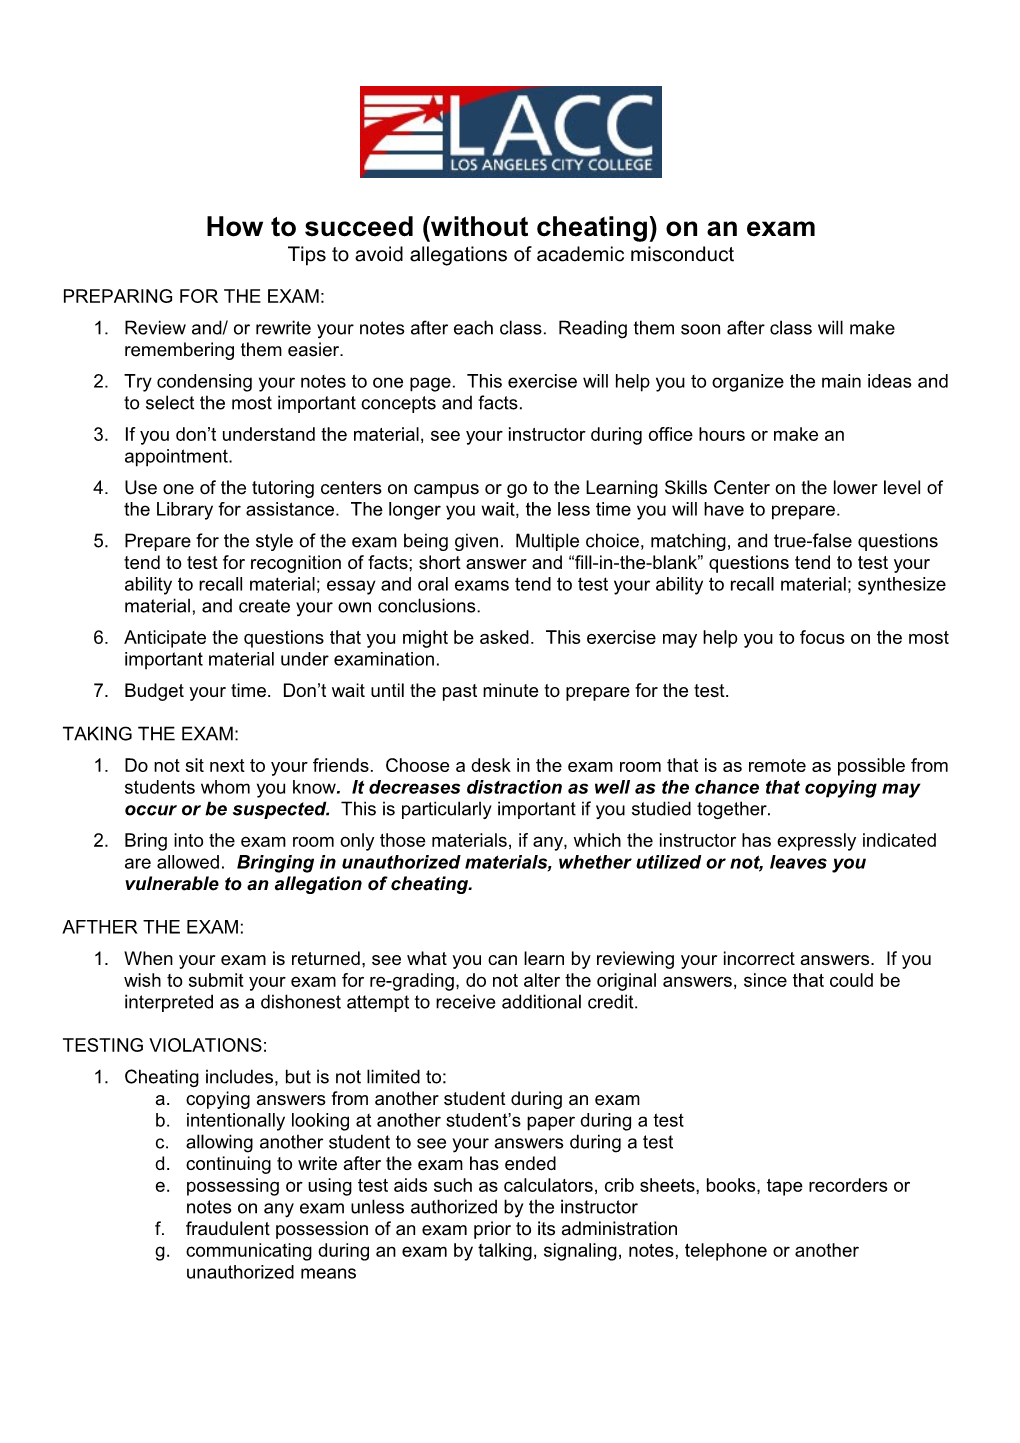 How to Succeed (Without Cheating) on an Exam